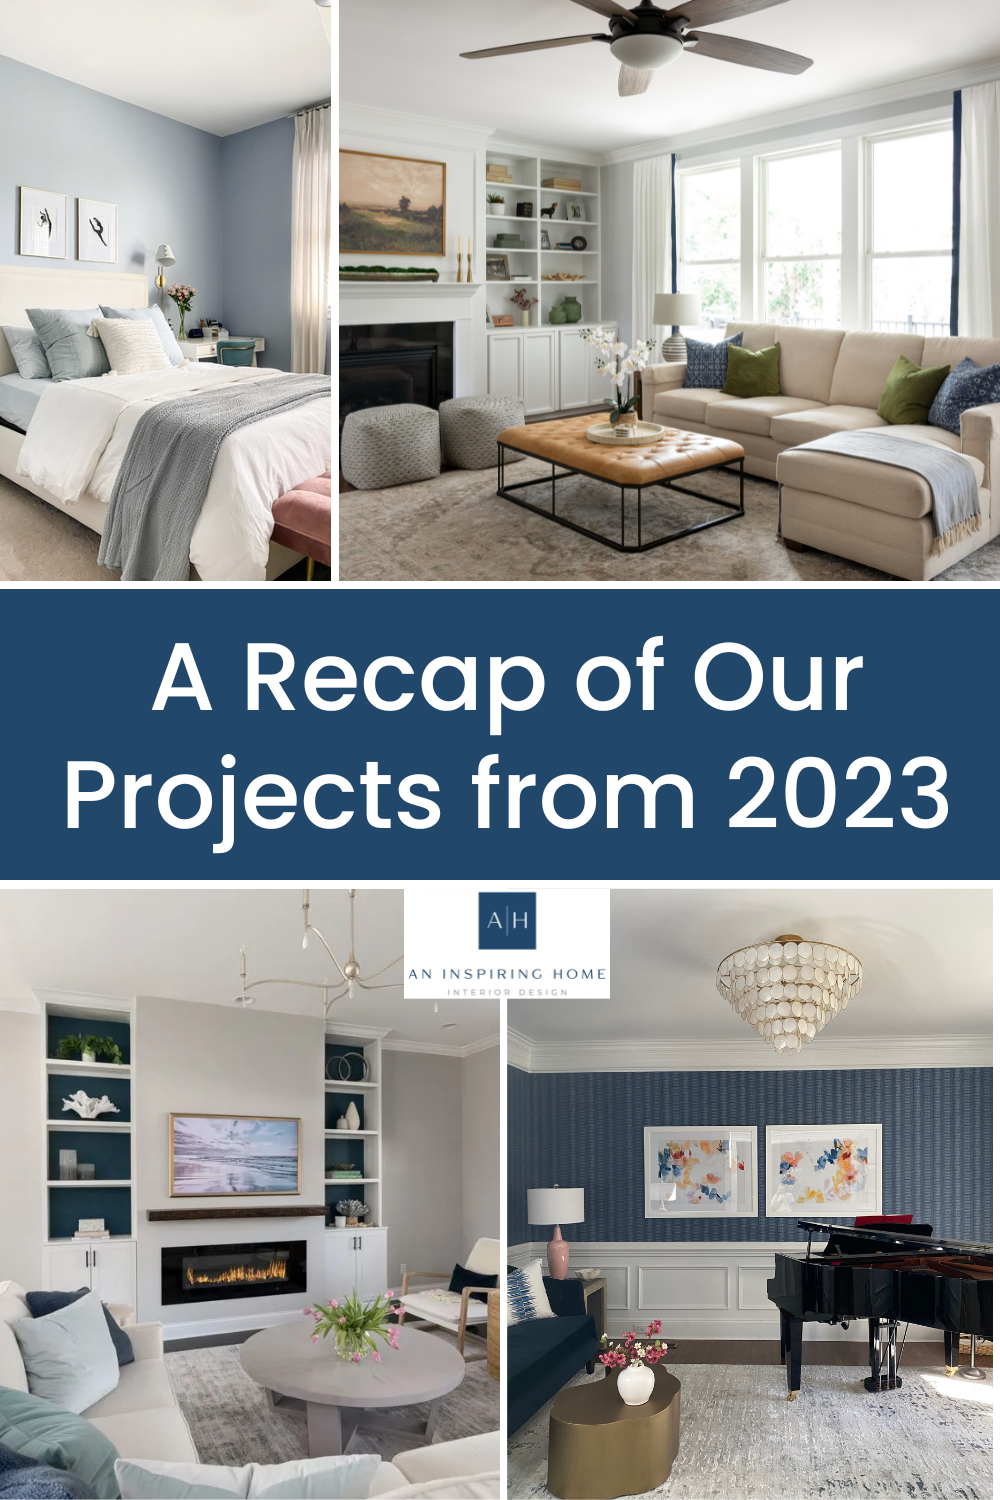 A Recap of Our Projects from 2023